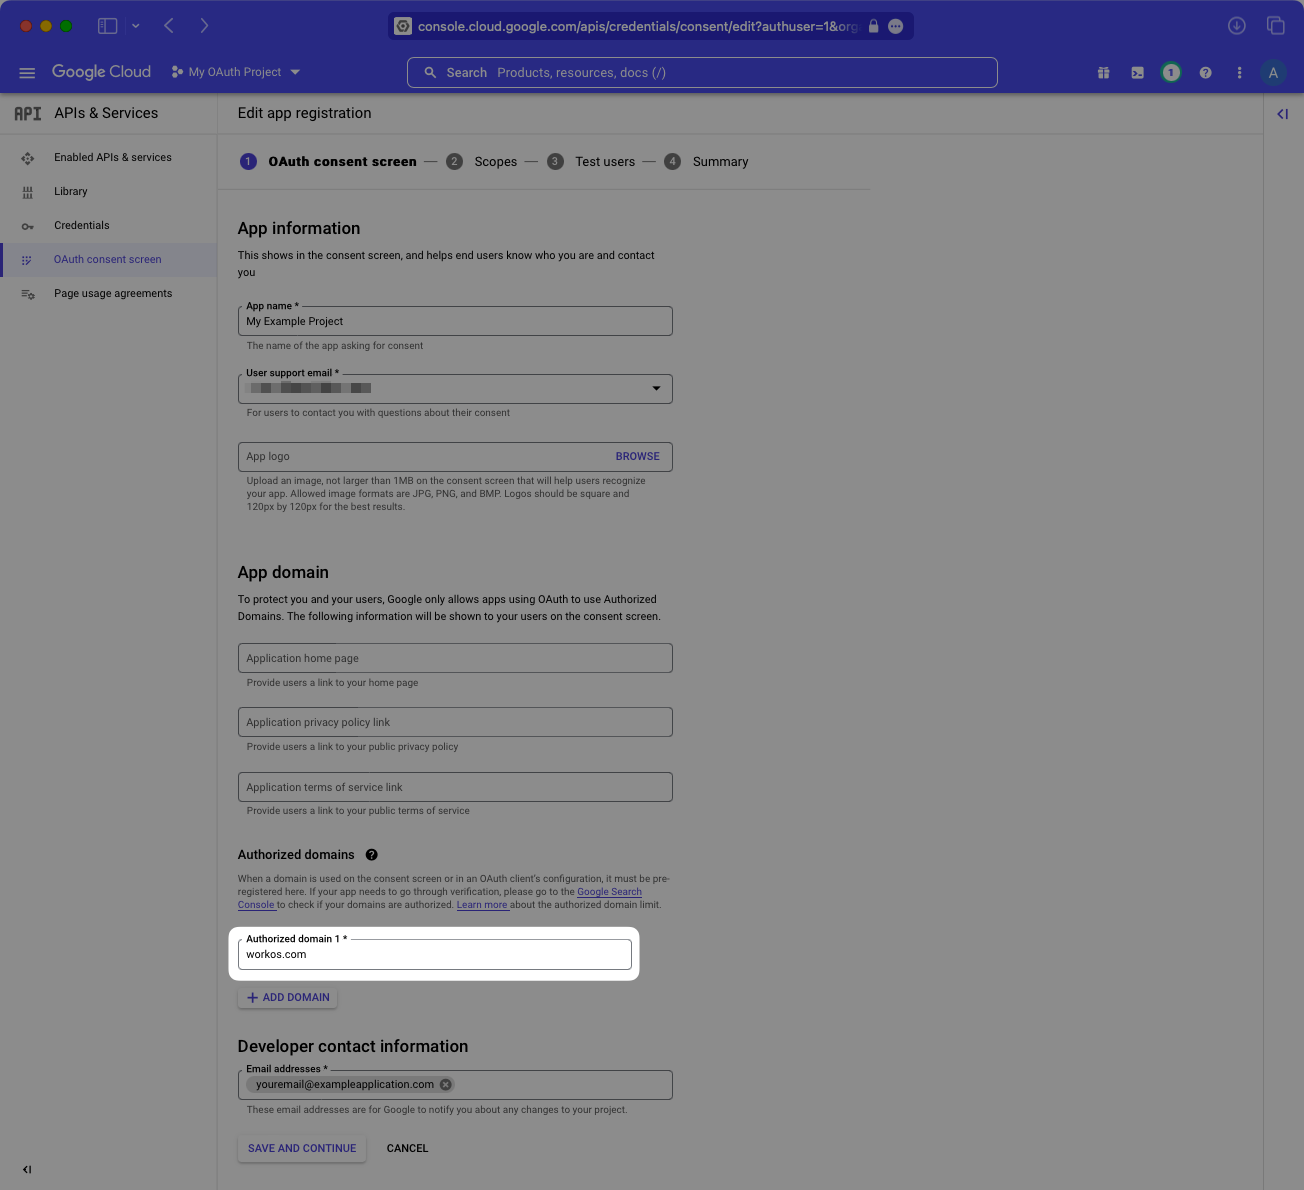 A screenshot showing where to enter workos.com as an "Authorized domain" in the Google Cloud Platform Console Dashboard.